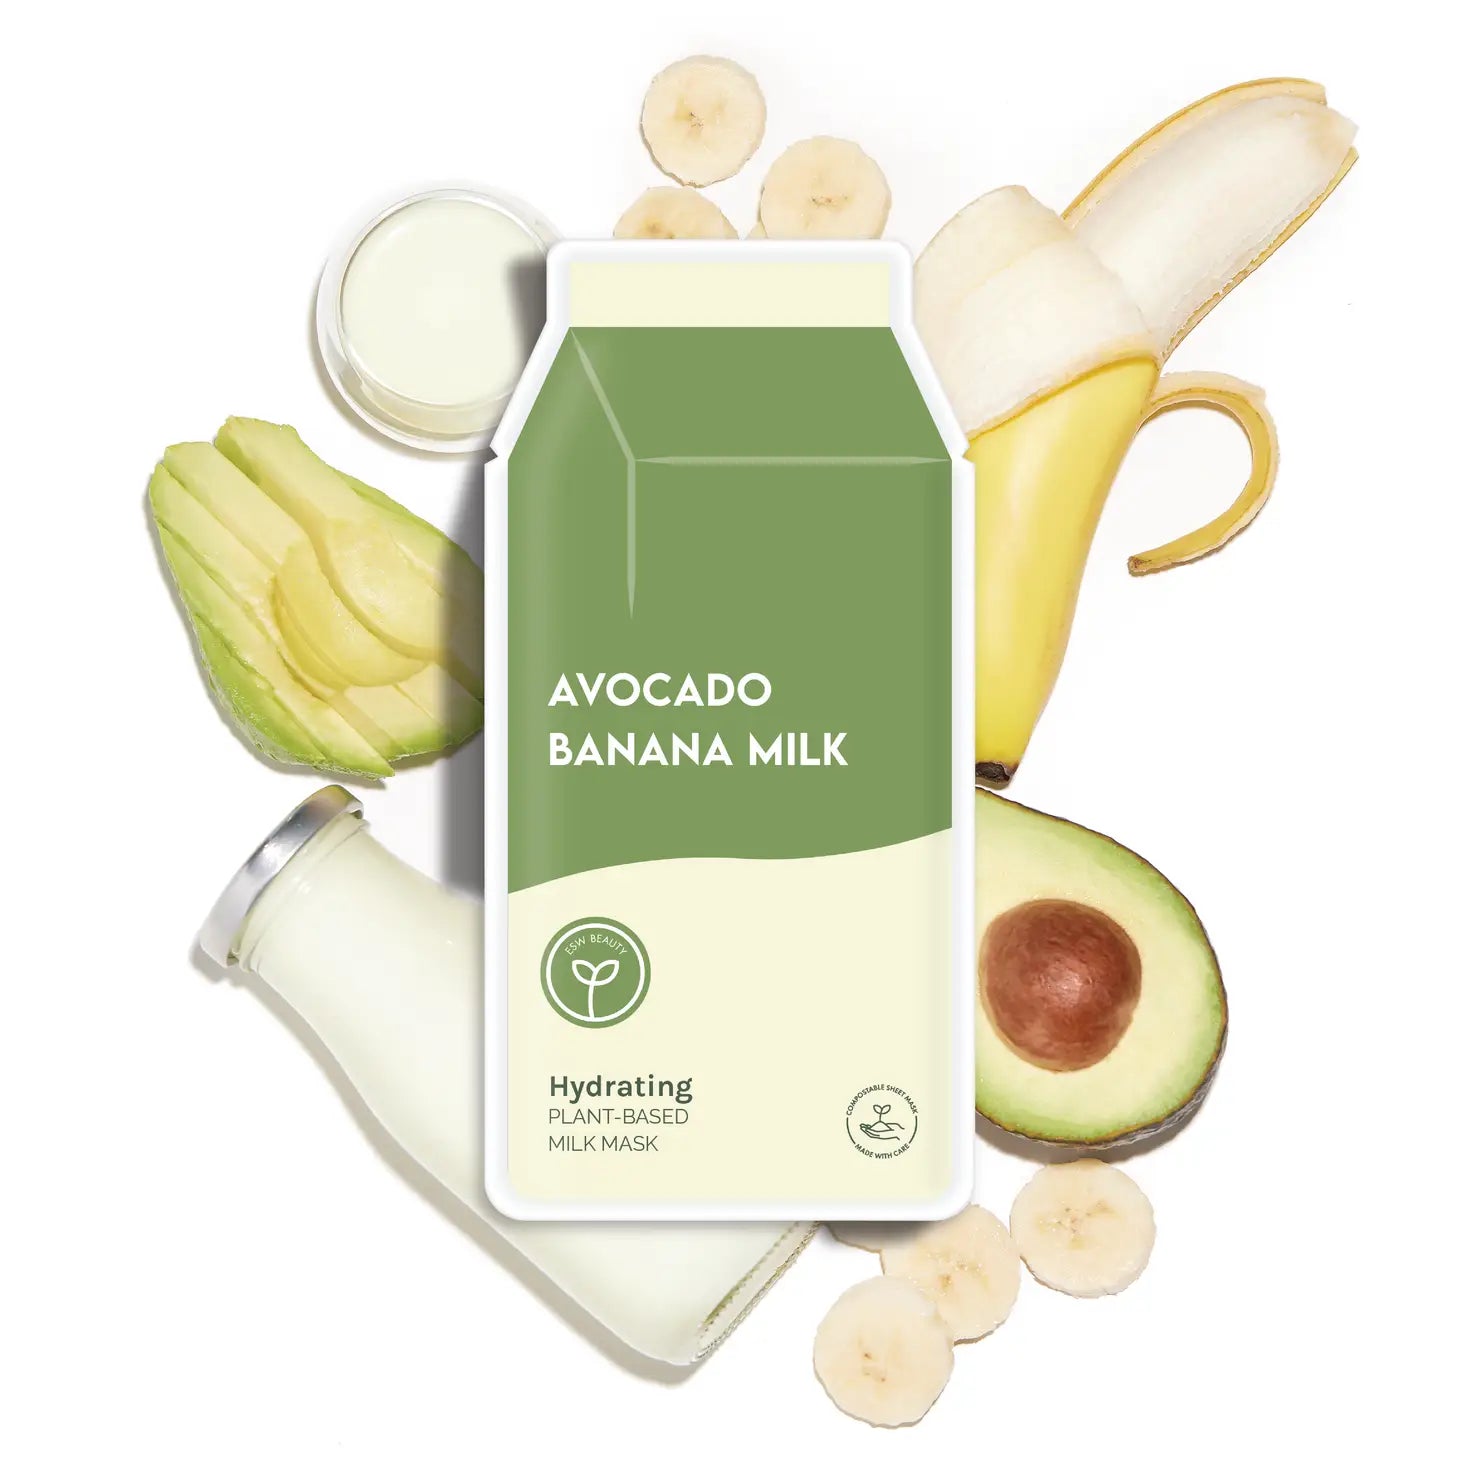 Milk carton shaped package on background of banana and avocado